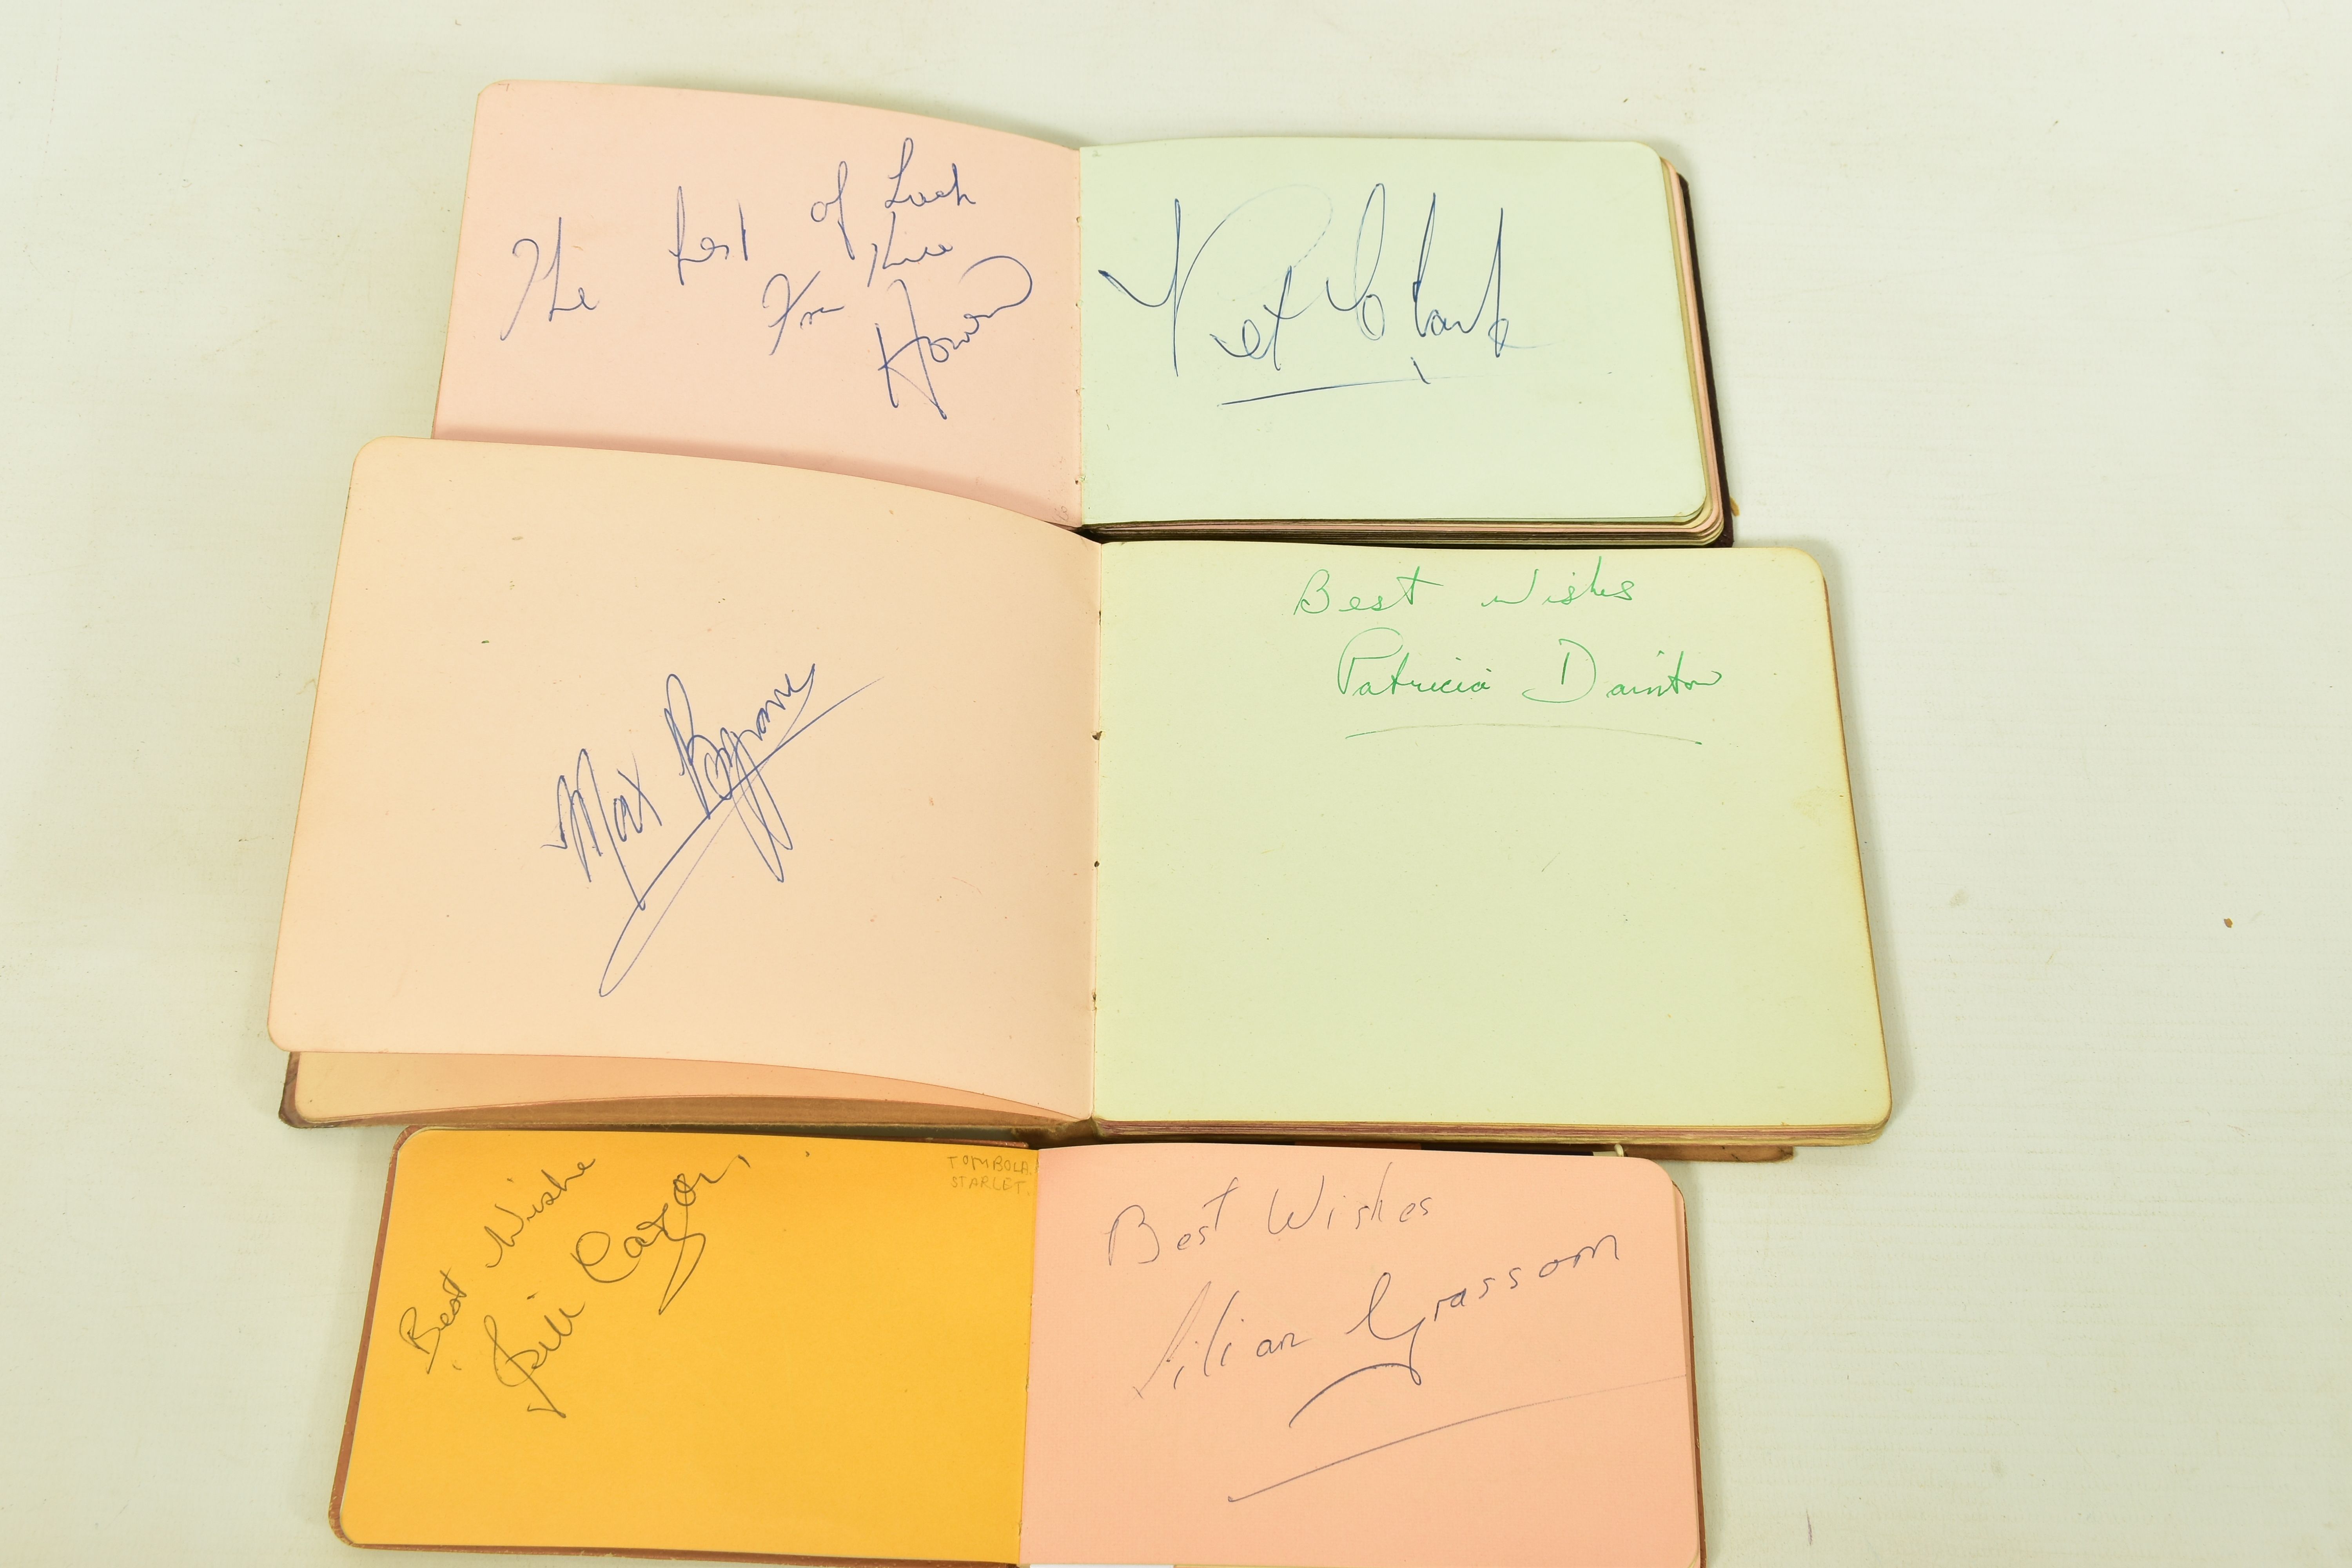 FILM & STAGE AUTOGRAPH ALBUM, a collection of signatures in three autograph albums featuring some of - Image 3 of 10